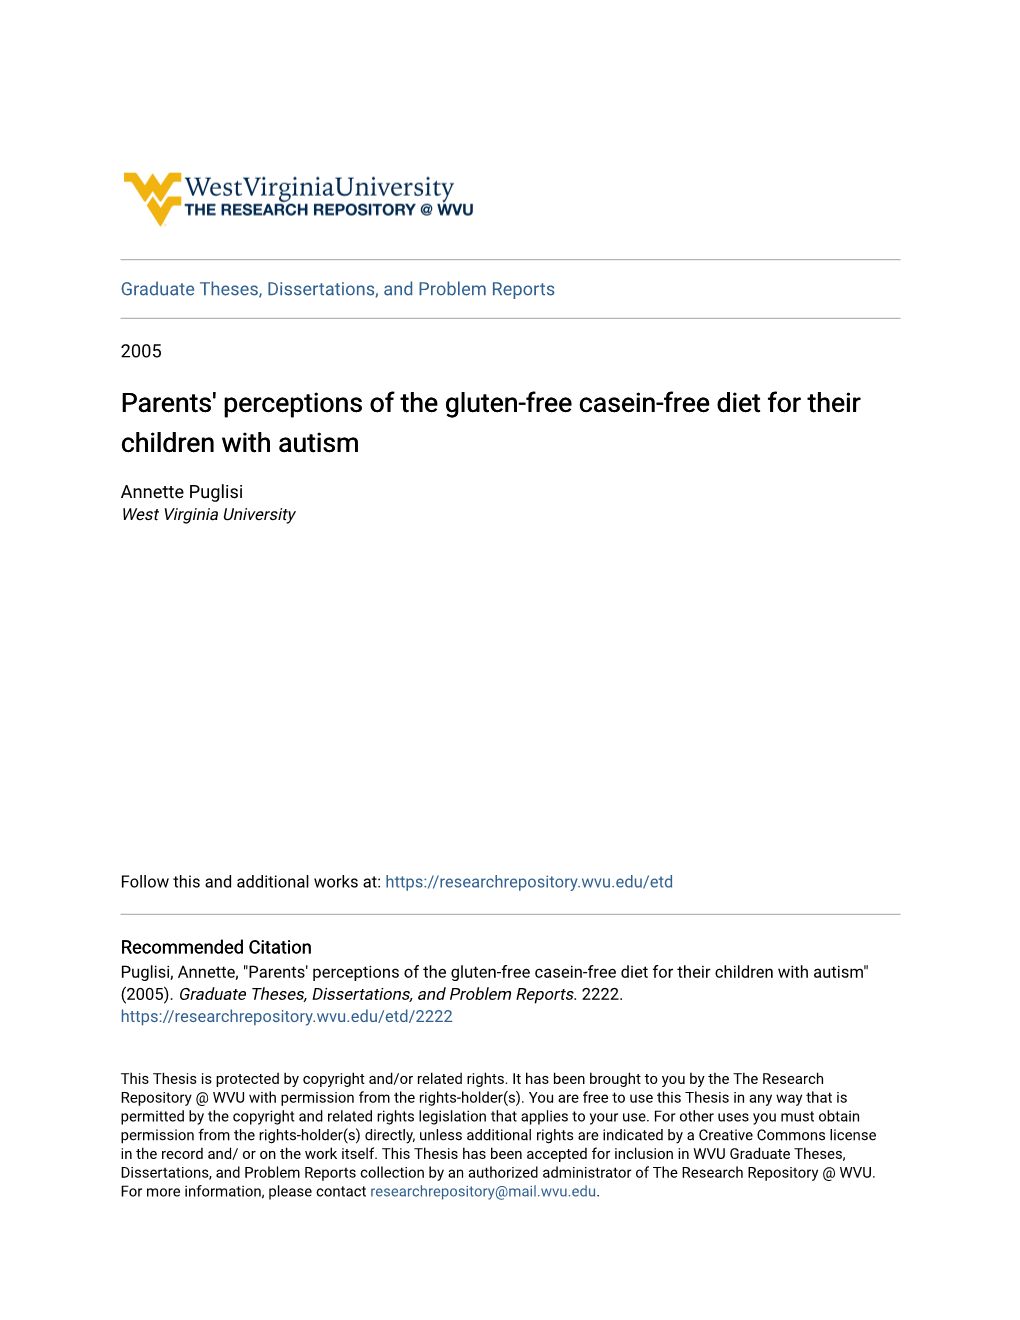 Parents' Perceptions of the Gluten-Free Casein-Free Diet for Their Children with Autism